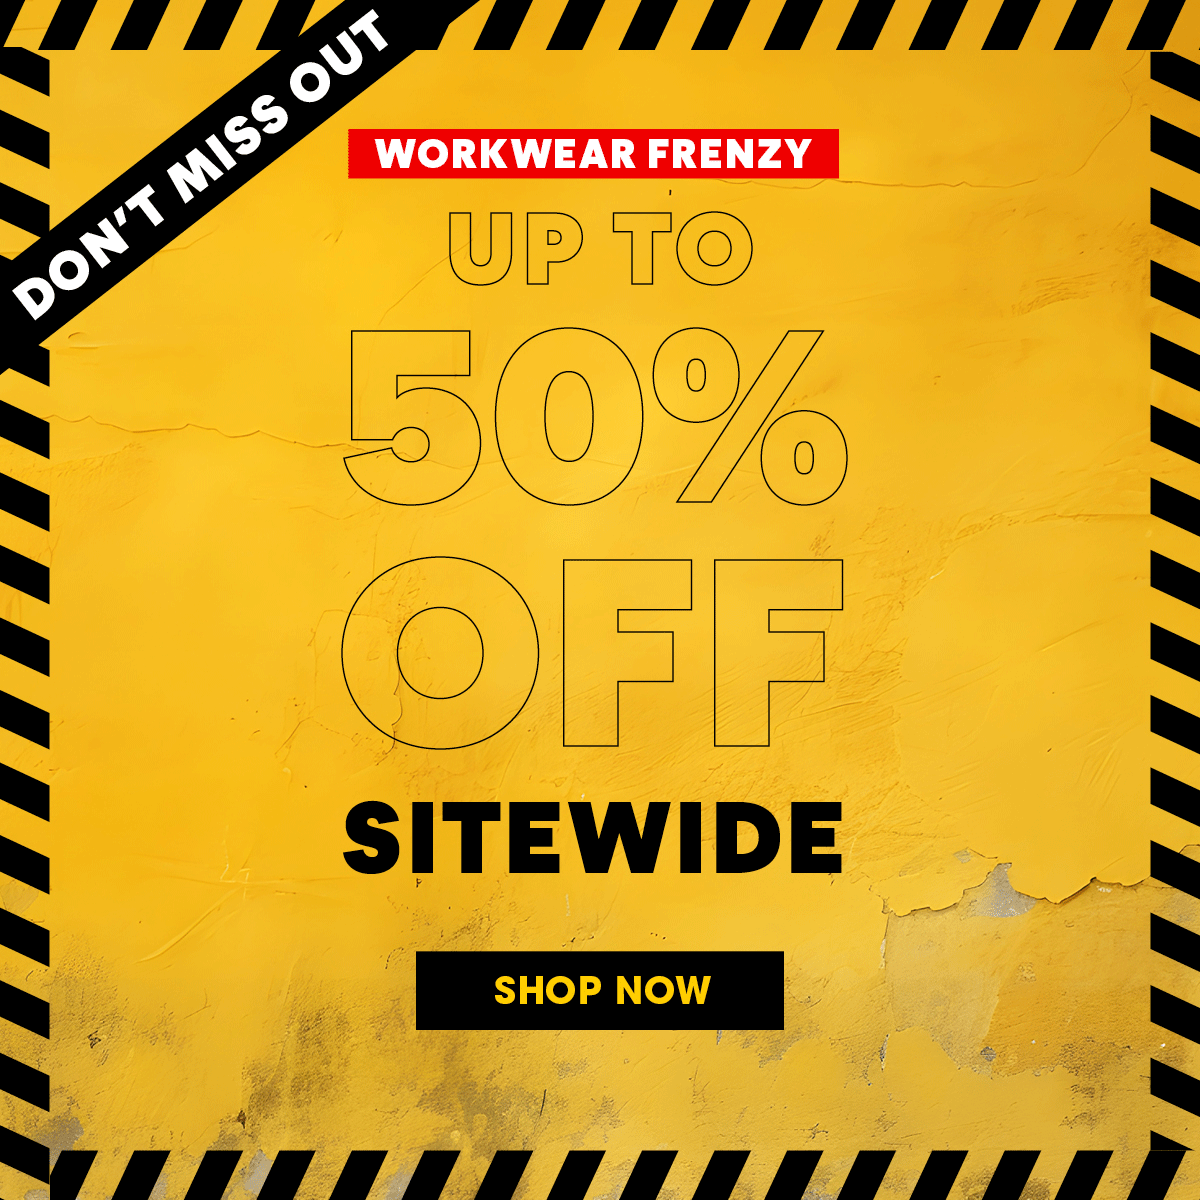 WORKWEAR FRENZY - UP TO 50% OFF SITEWIDE